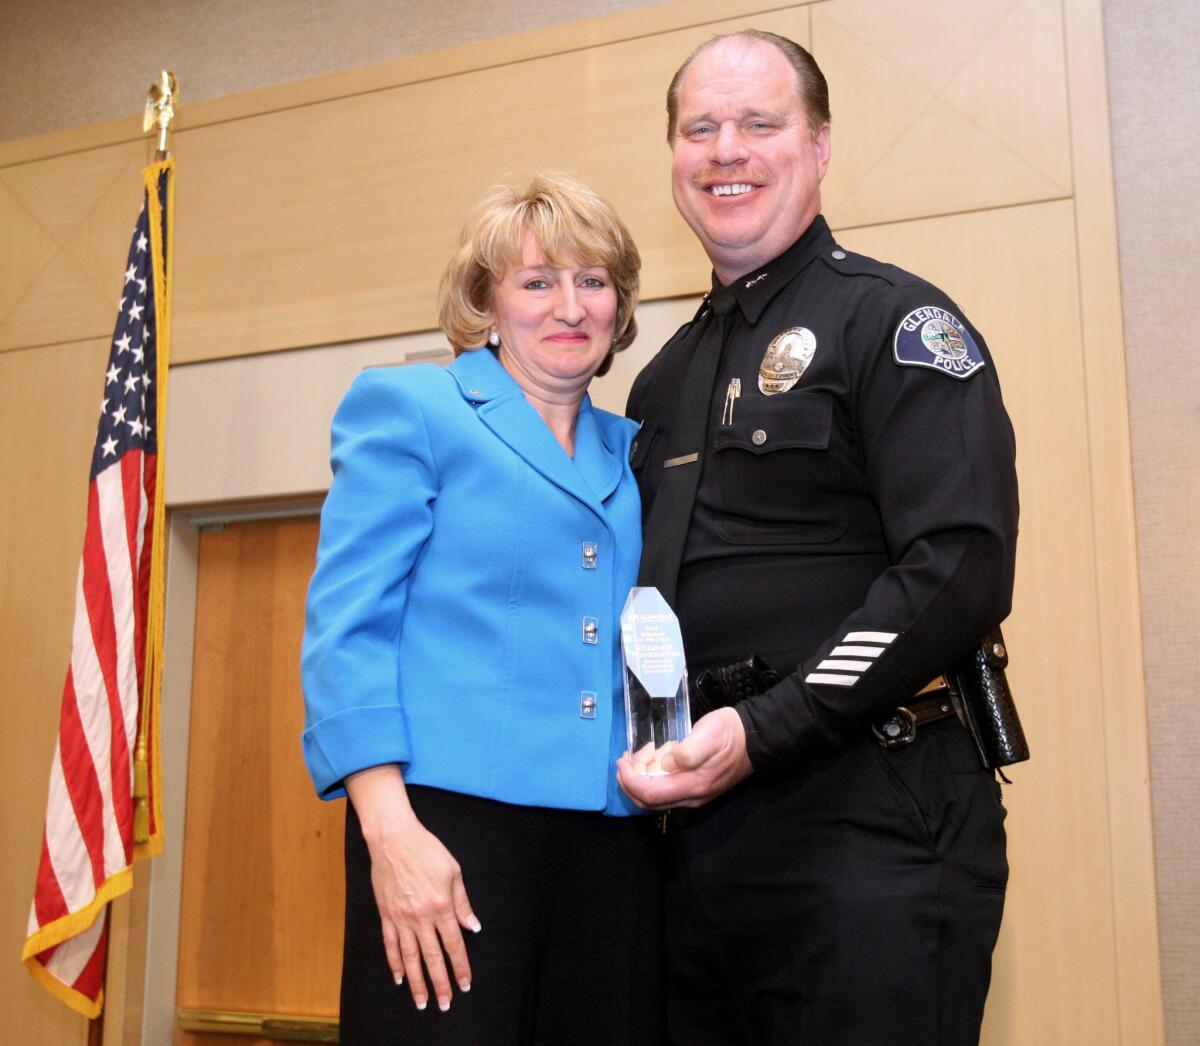 Boardwalk Properties' Elizabeth Manesserian received the Woman of the Year award from Glendale Police Department Deputy Chief Carl Povilaitis at this year's luncheon at the Hilton in Glendale on Thursday, March 31, 2016.